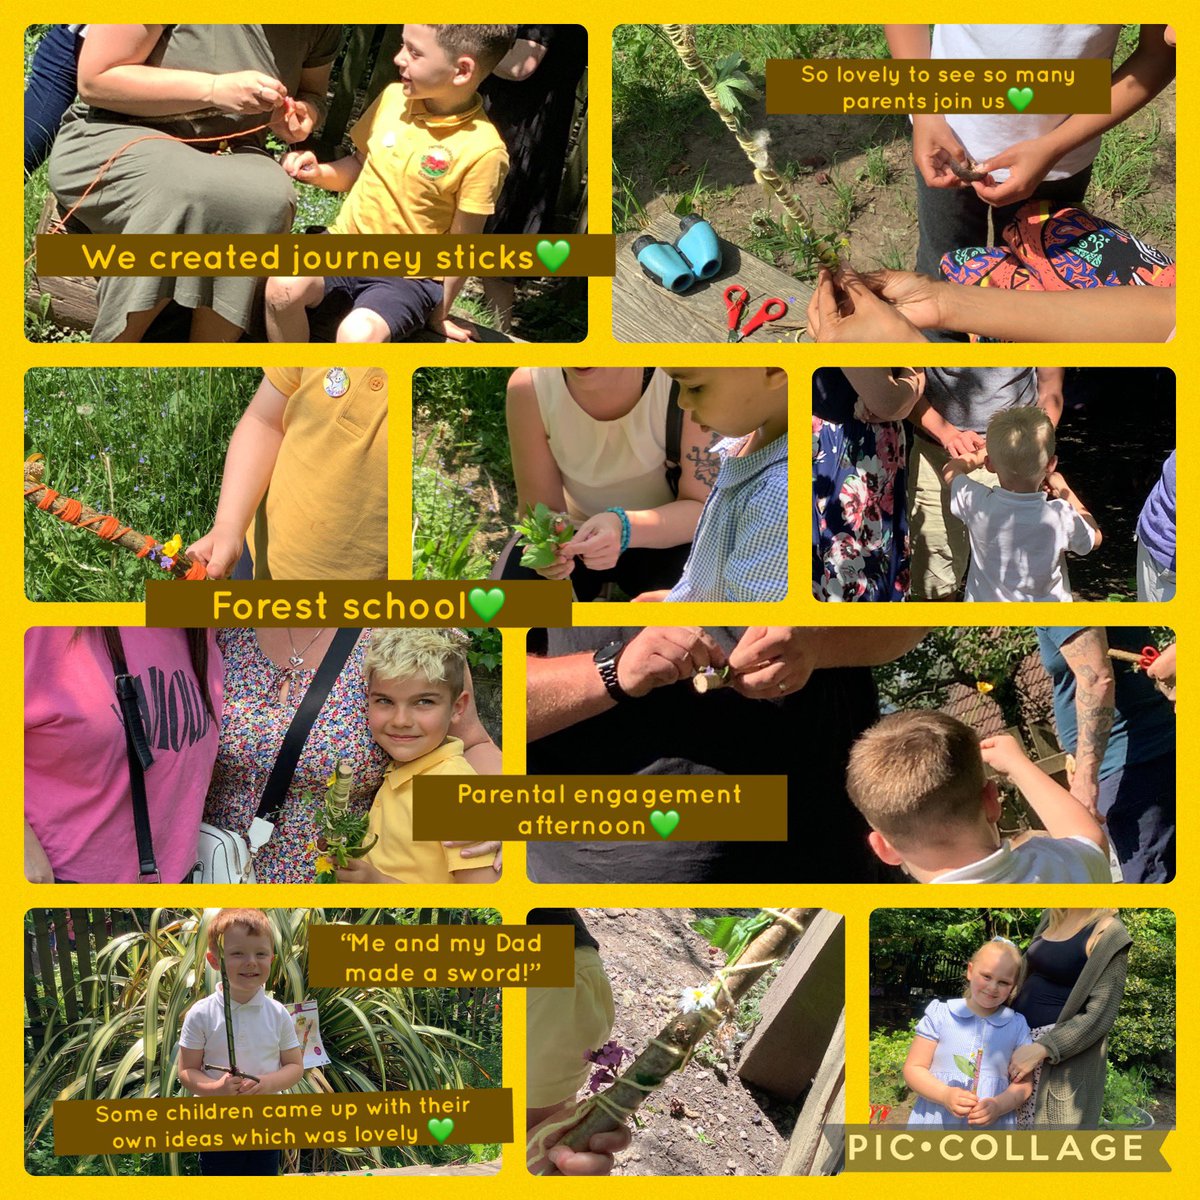 It was lovely to welcome you all to forest school today as part of our family engagement afternoon 💚🌳 It was so wonderful to see you all enjoying our area, sharing lovely interactions and making memories 💚🌳🌱 #OL #Parents #Familyengagement